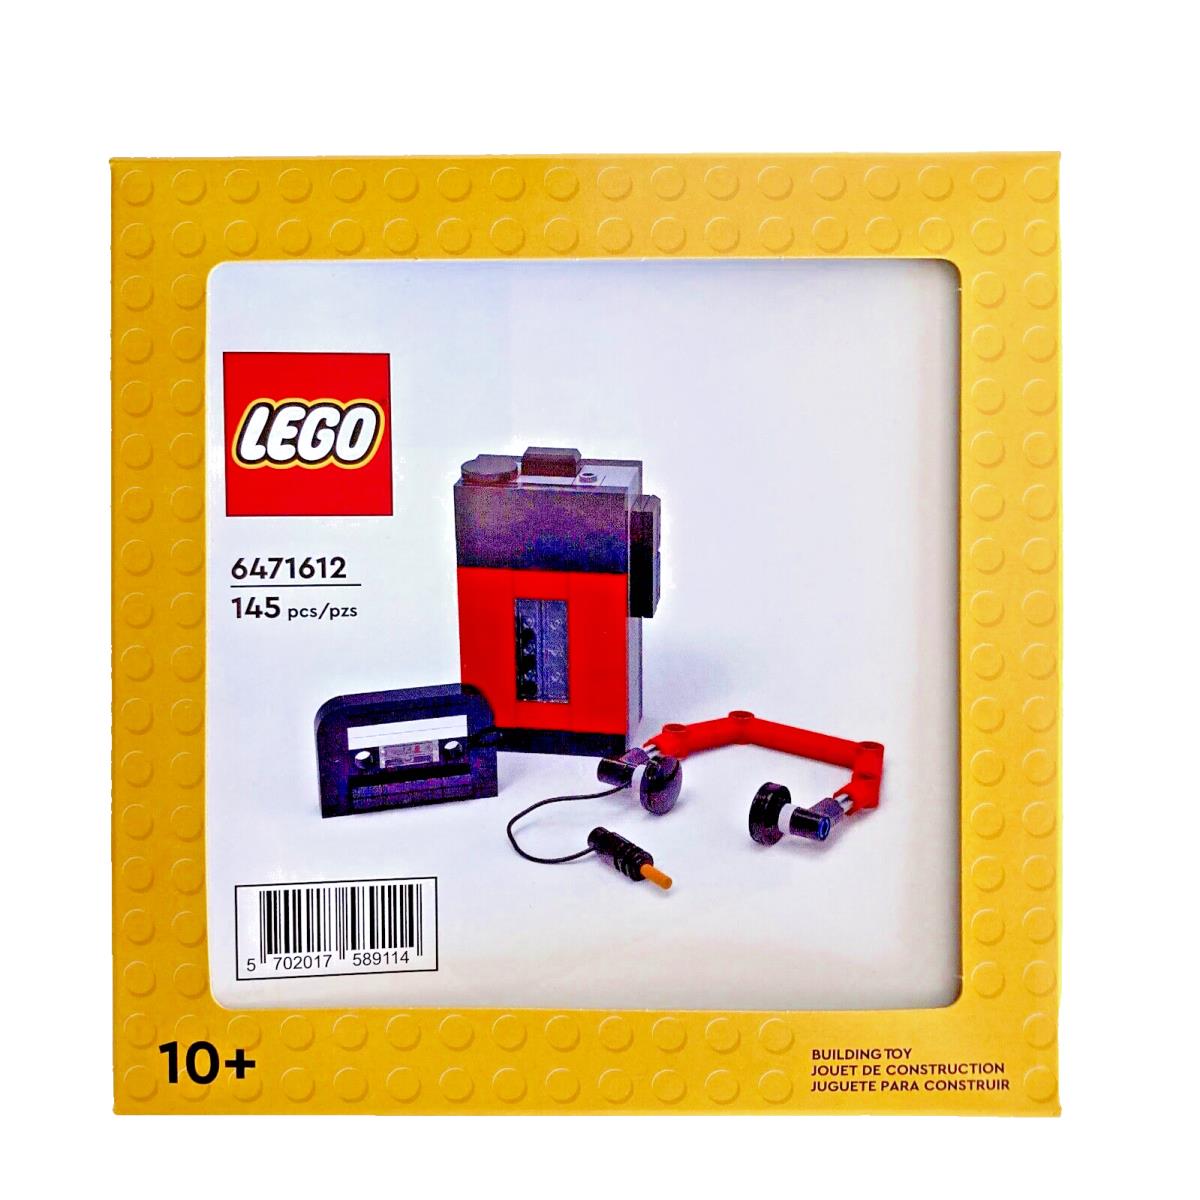 Lego Cassette Tape Player Limited Edition Exclusive Set 6471612